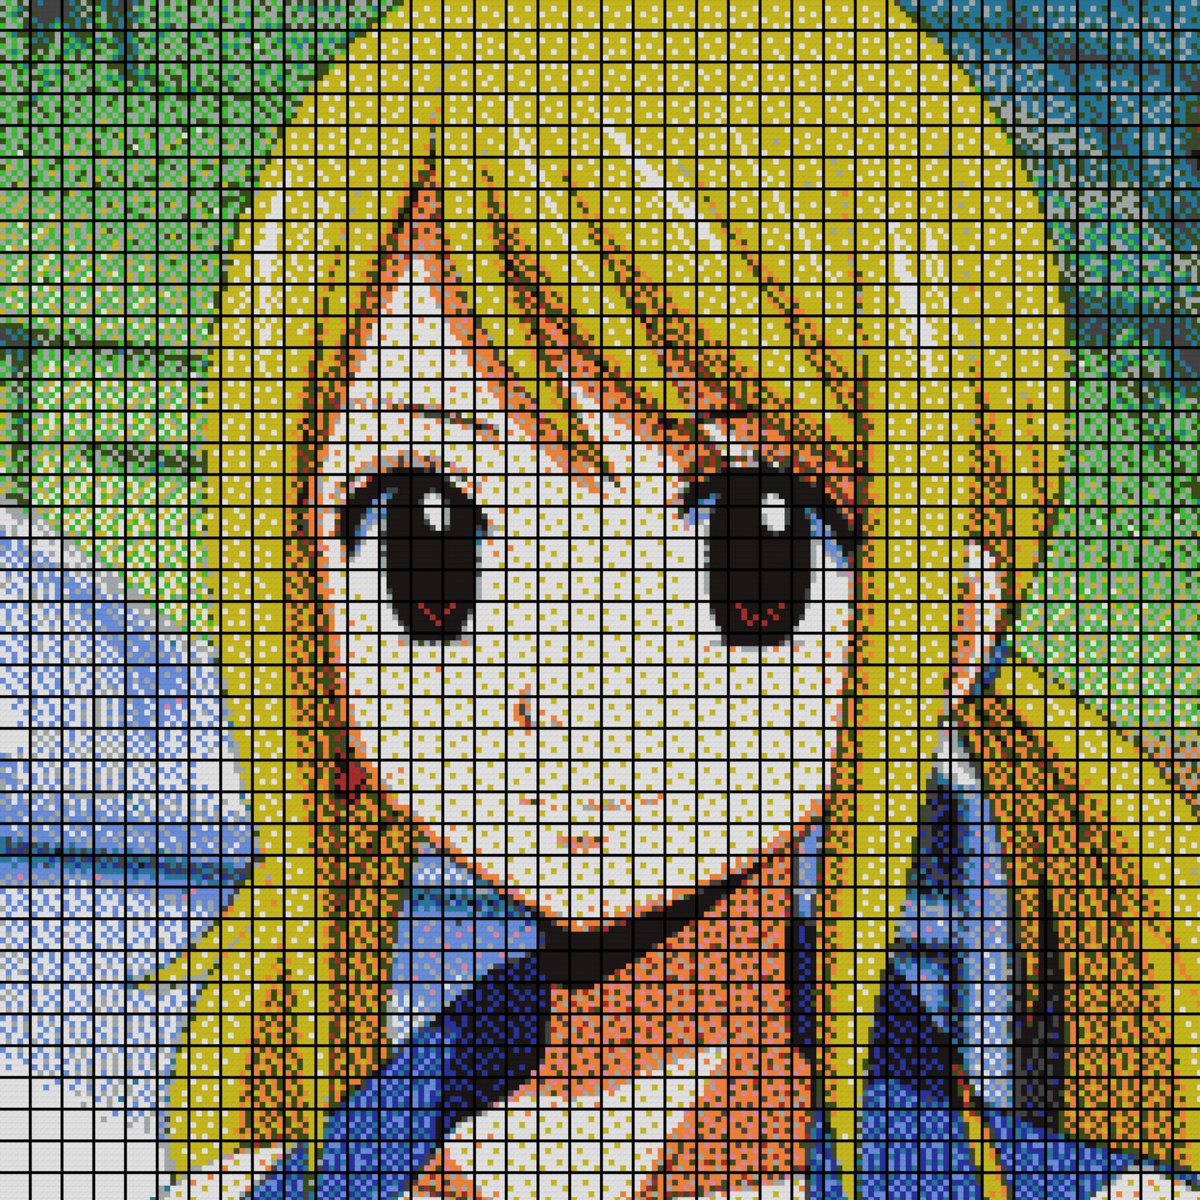 Minecraft Easy Anime Pixel Art Grid / The minecraft map, heart in